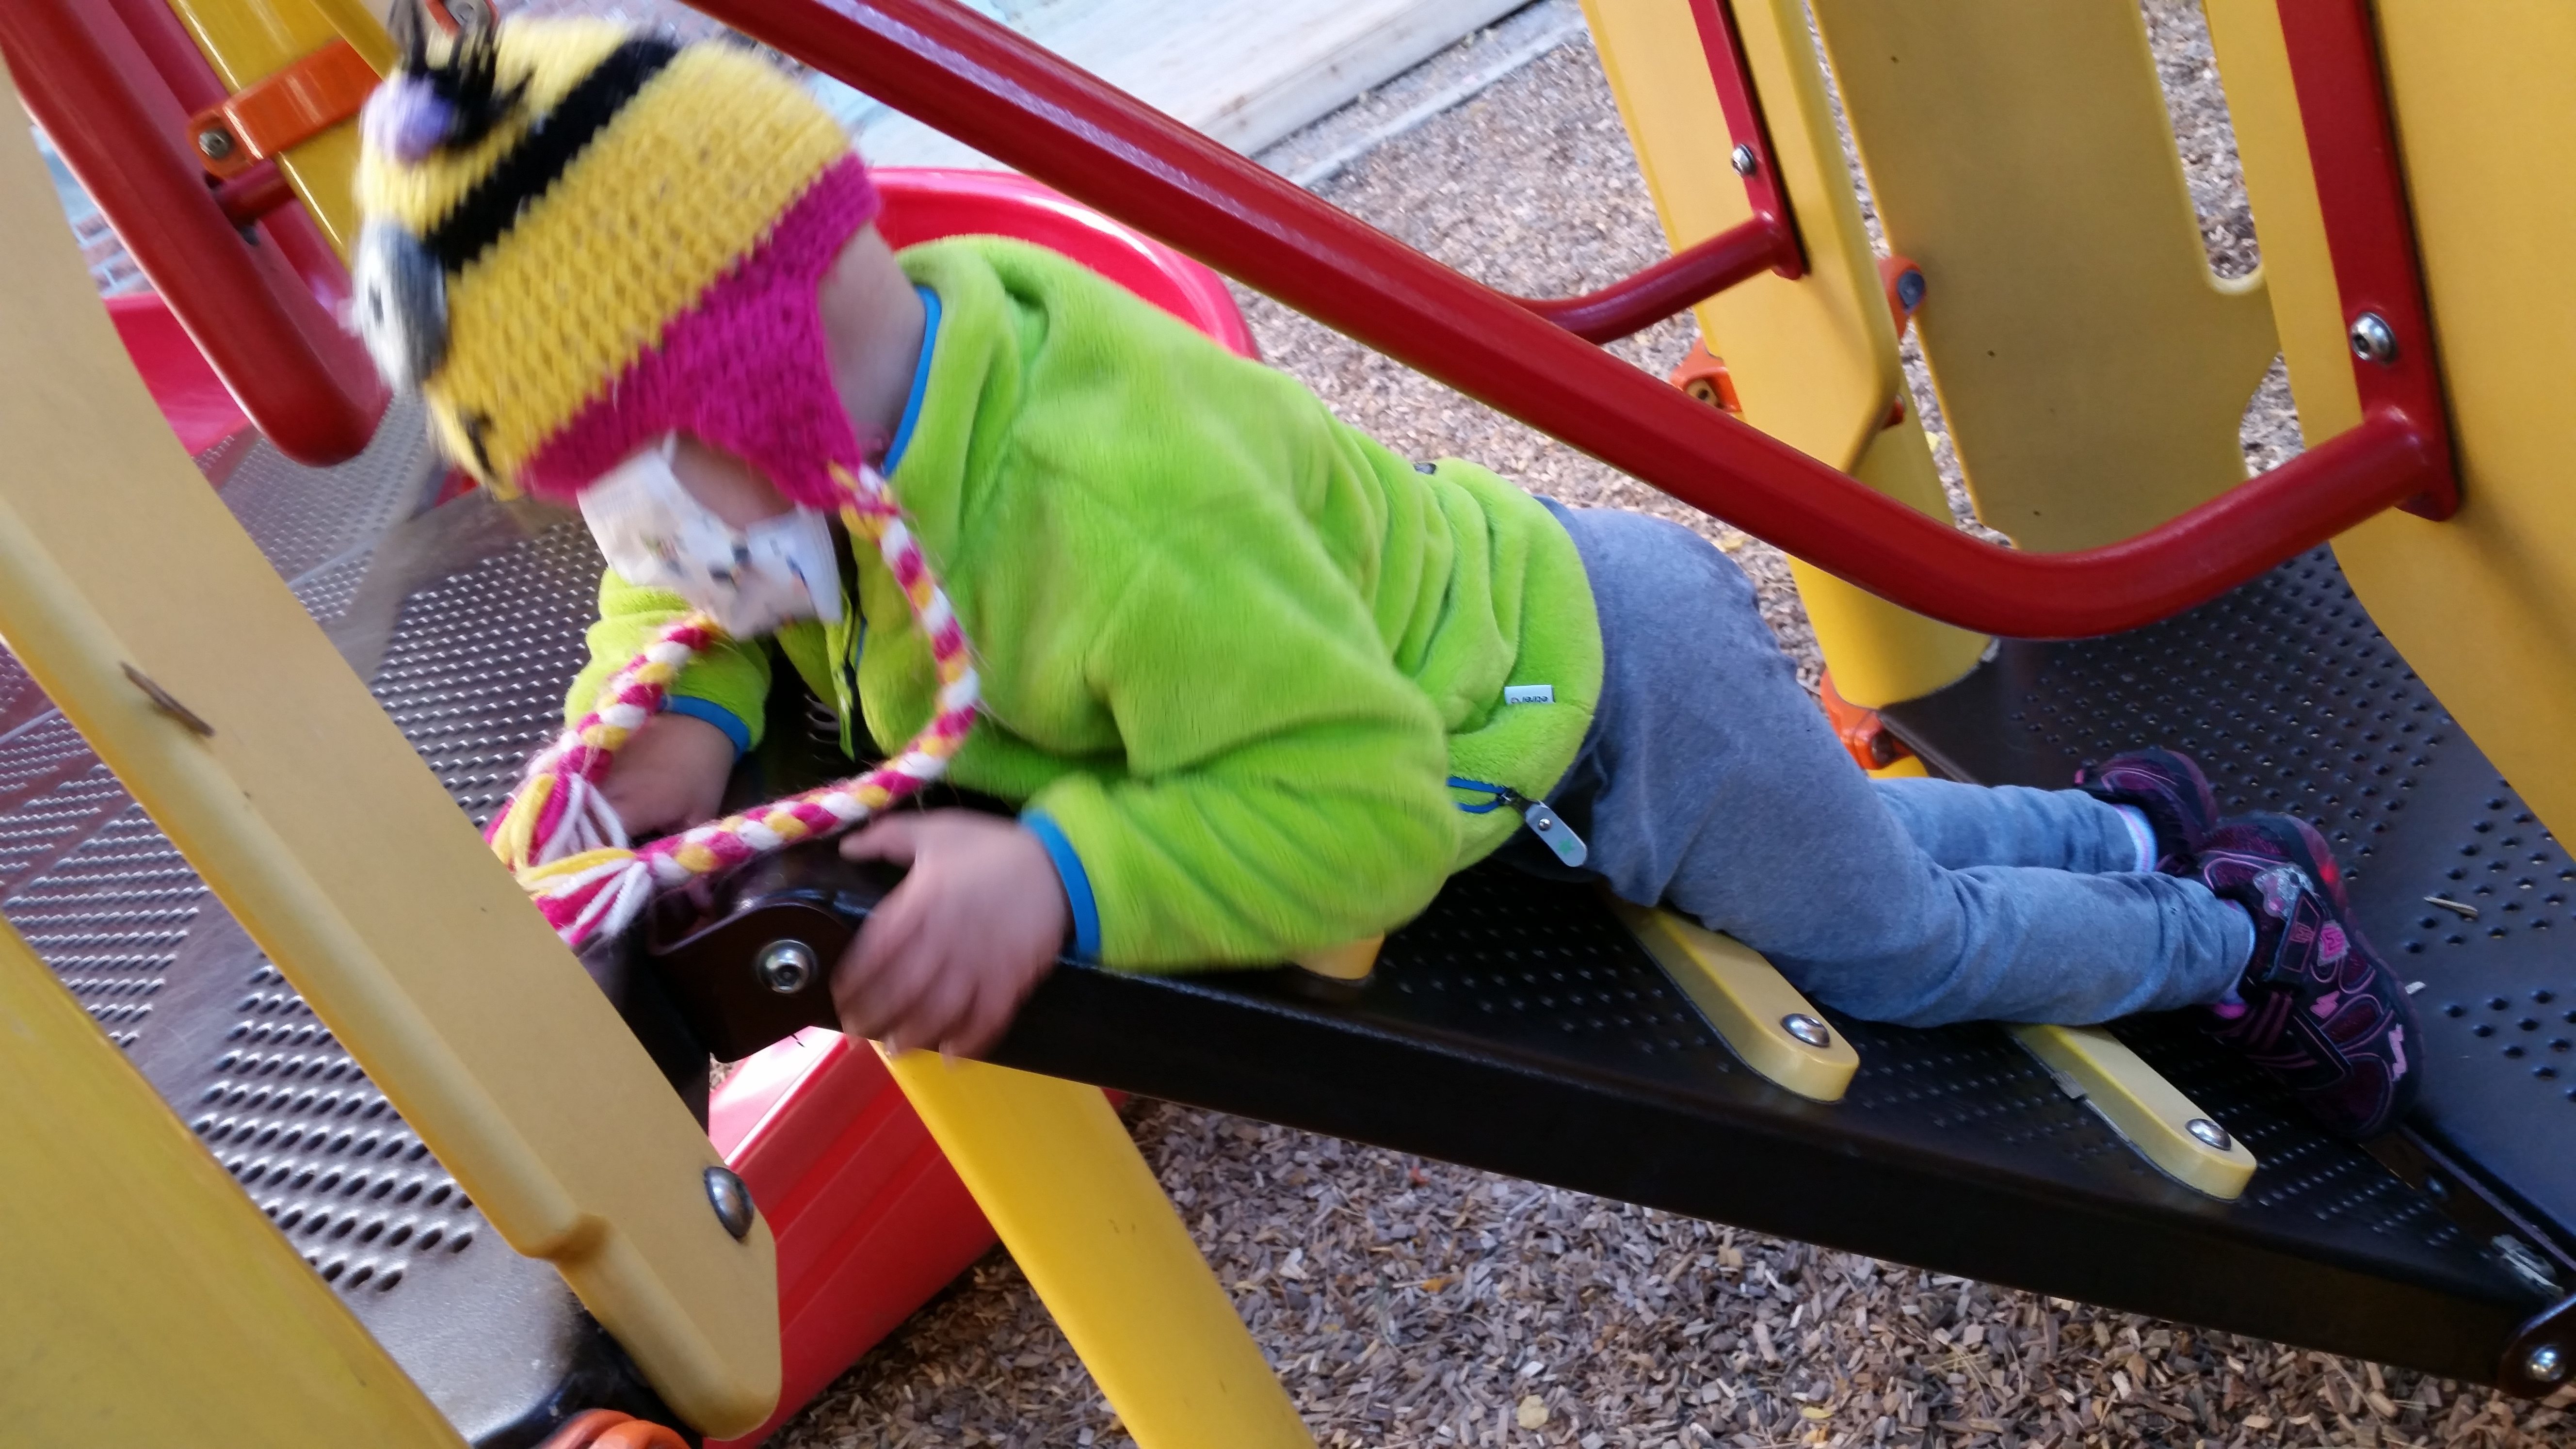 Sam climbing the ramp stairs on the playground equipment at the school across from RMH